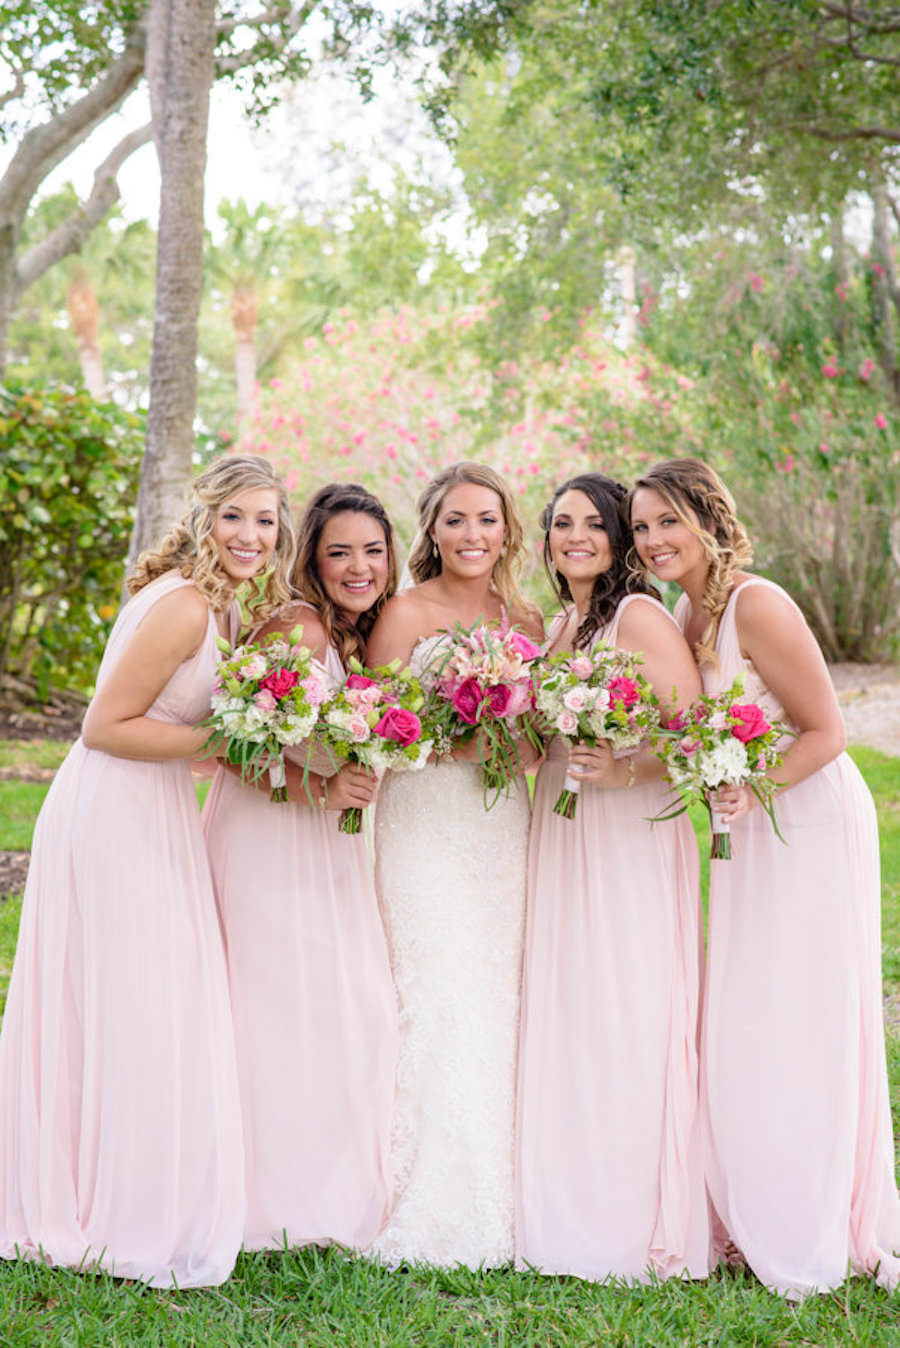 Outdoor Beach Wedding Bridal Party Ceremony Portrait, Bridesmaids in Pink Dessy Group Dresses, Bride in Lace Sweetheart Essense of Australia Dress, with Pink, Magenta, Yellow White Rose and Floral Bouquet with Tropical Greenery